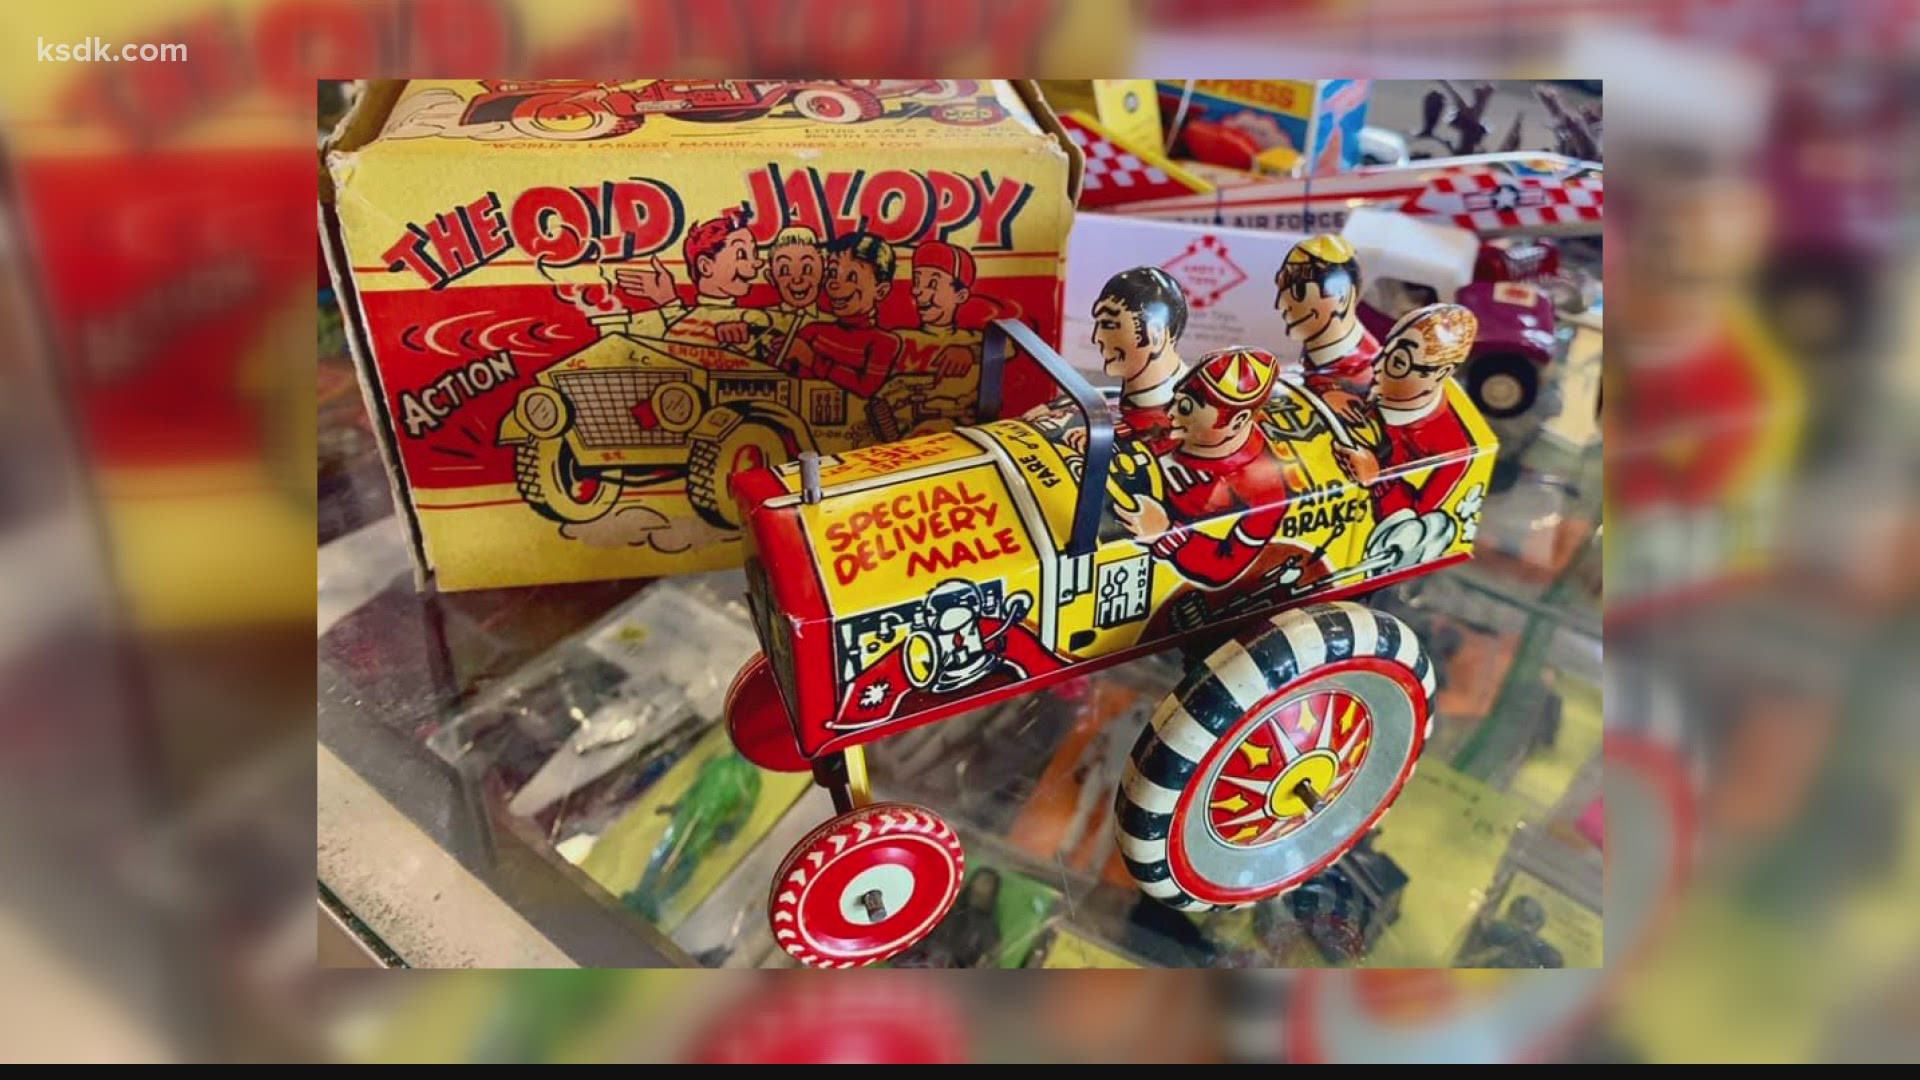 Andy's Toys in Shrewsbury will take you on a trip back in time.